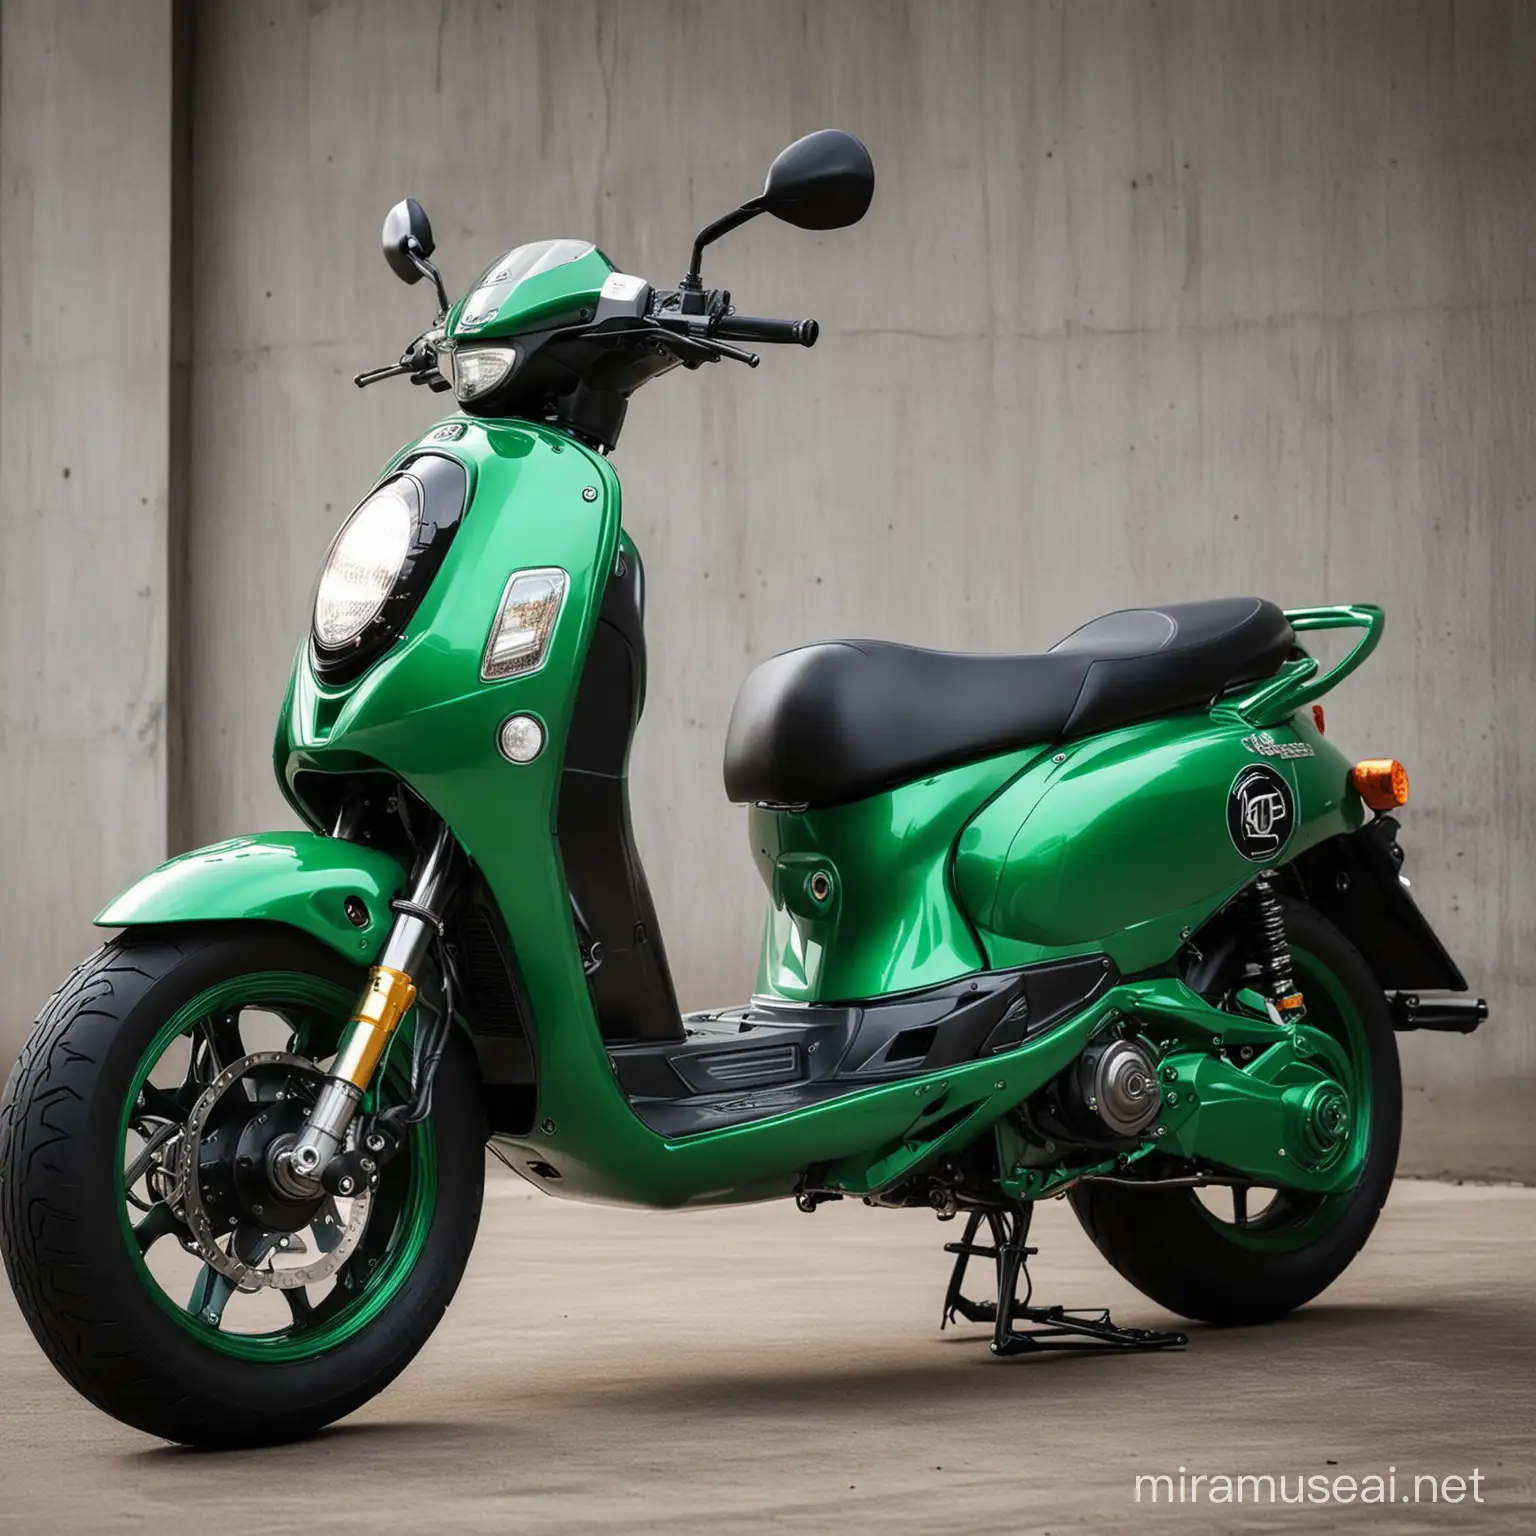 Green Lantern DC Style Honda Scoopy Motorcycle Riding in Urban City